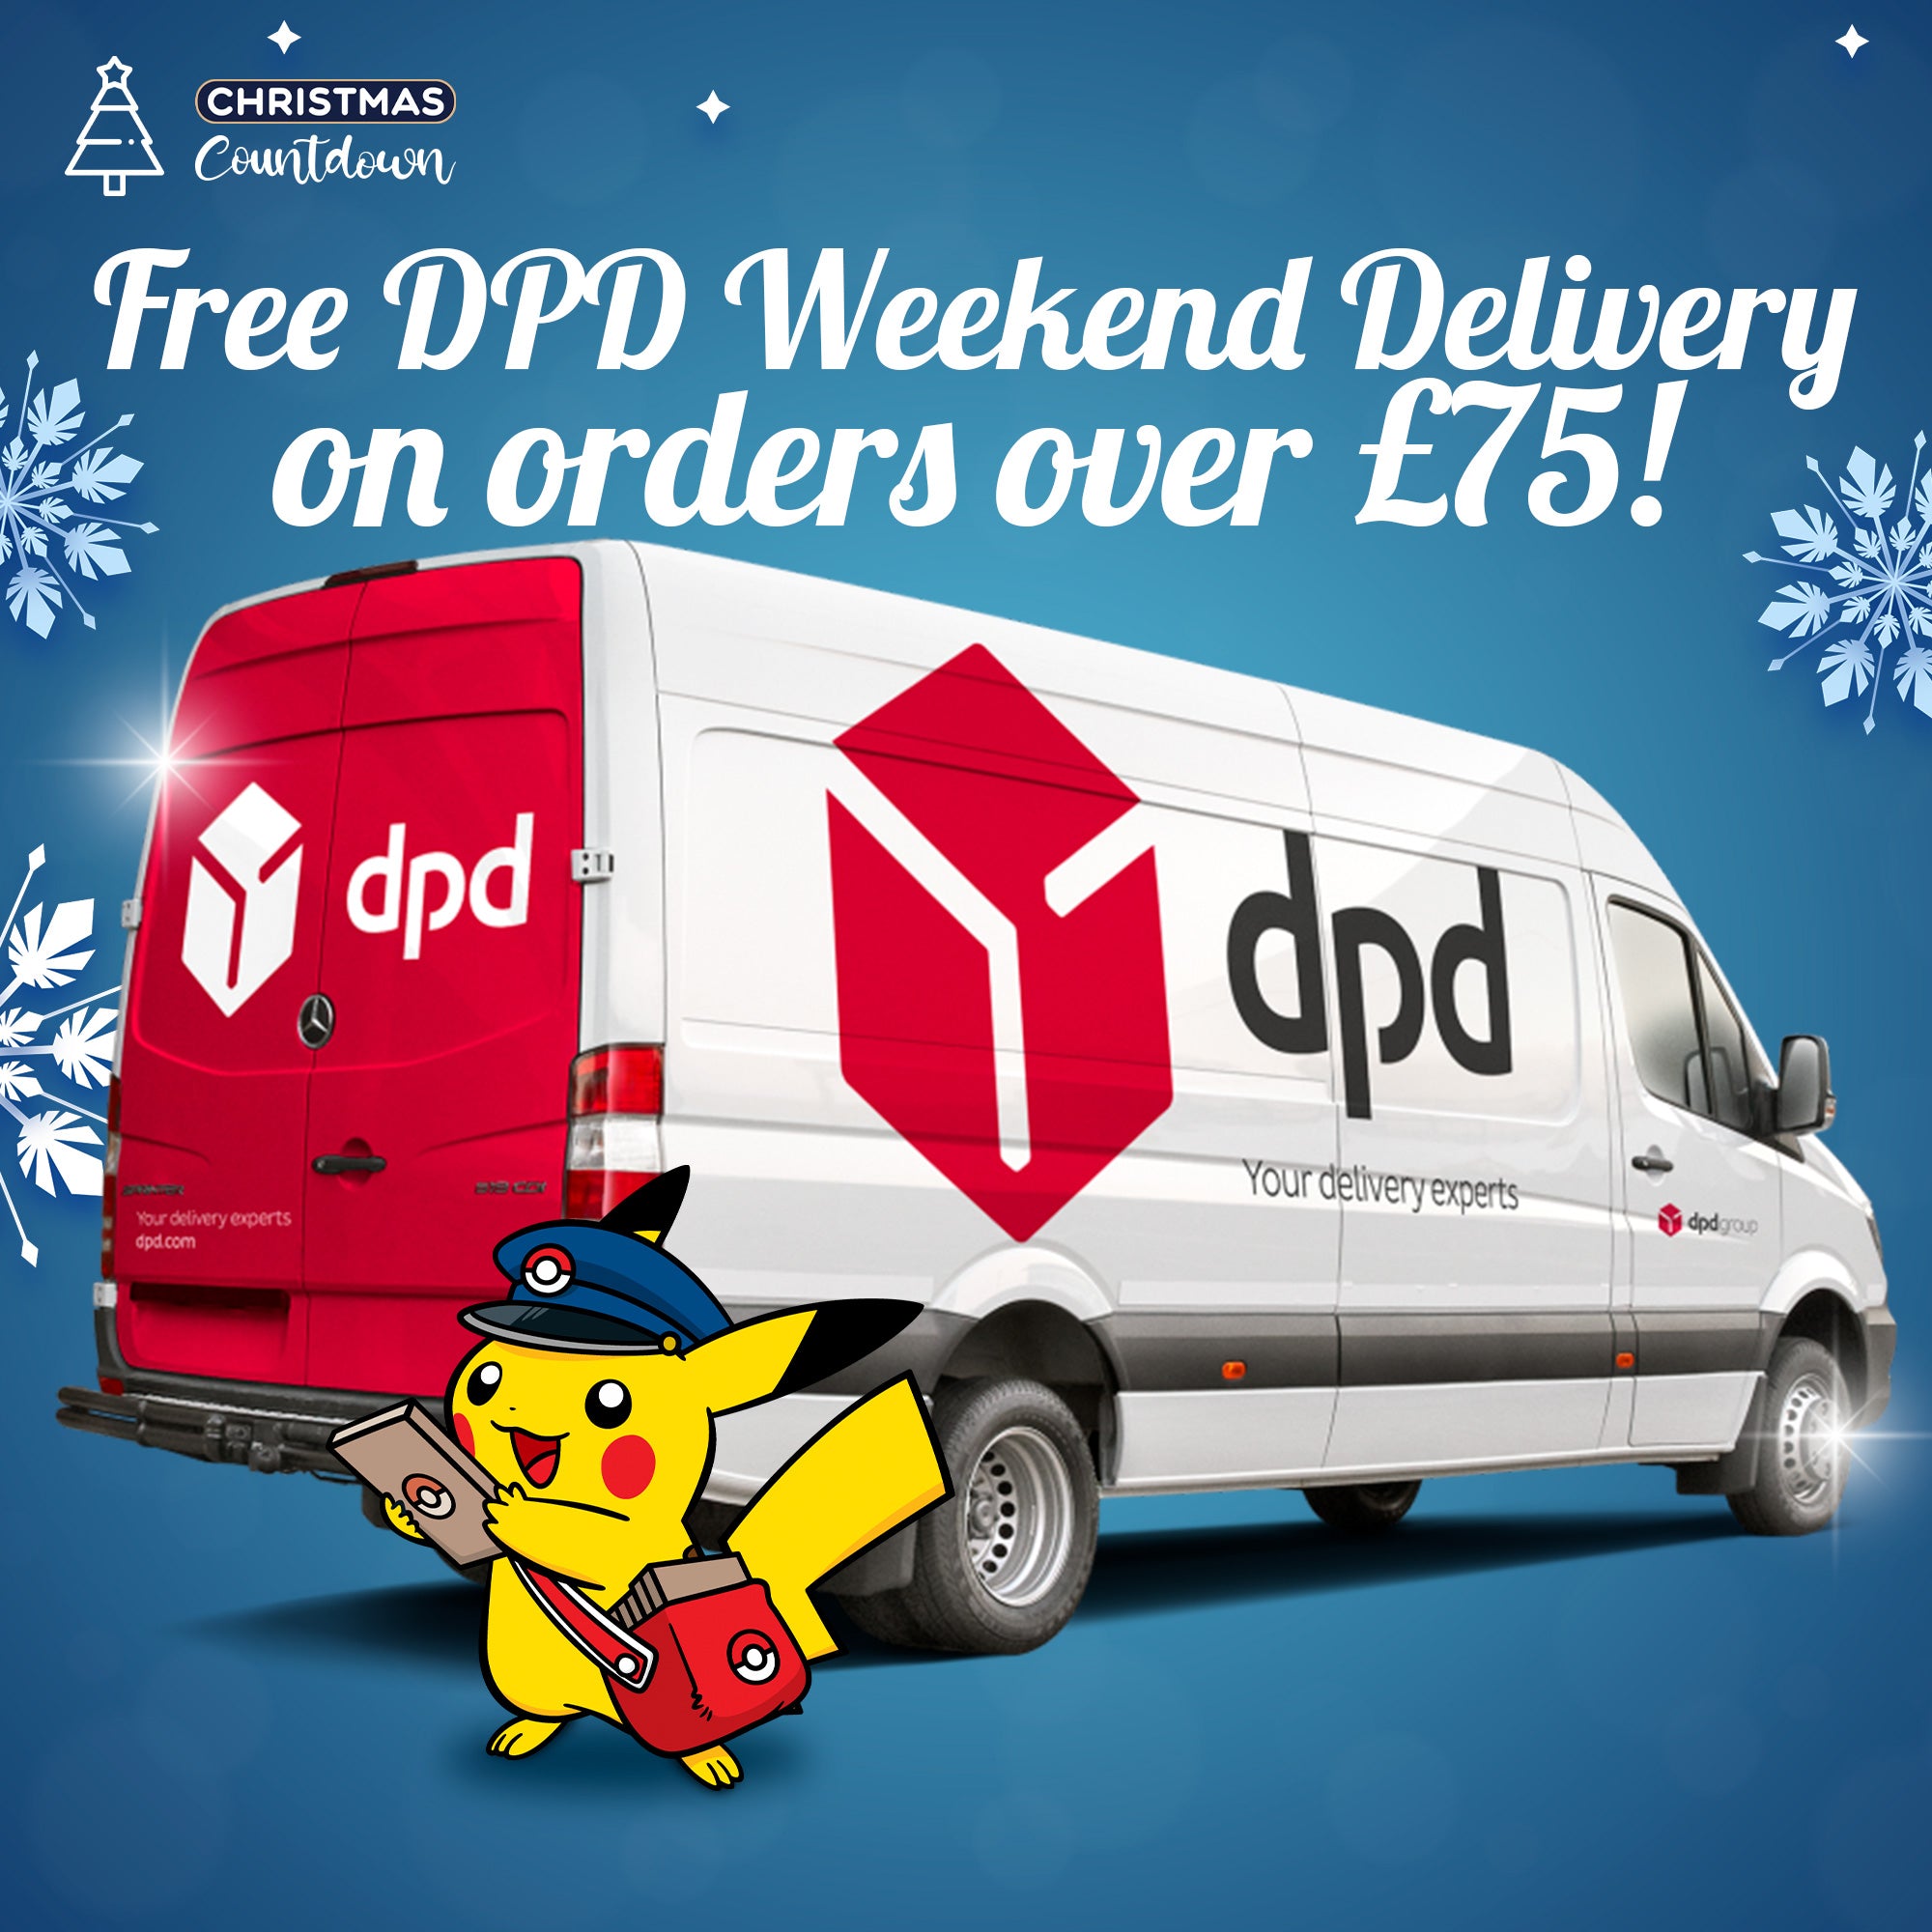 FREE DPD DELIVERY - Christmas Countdown 2023 - Day 22